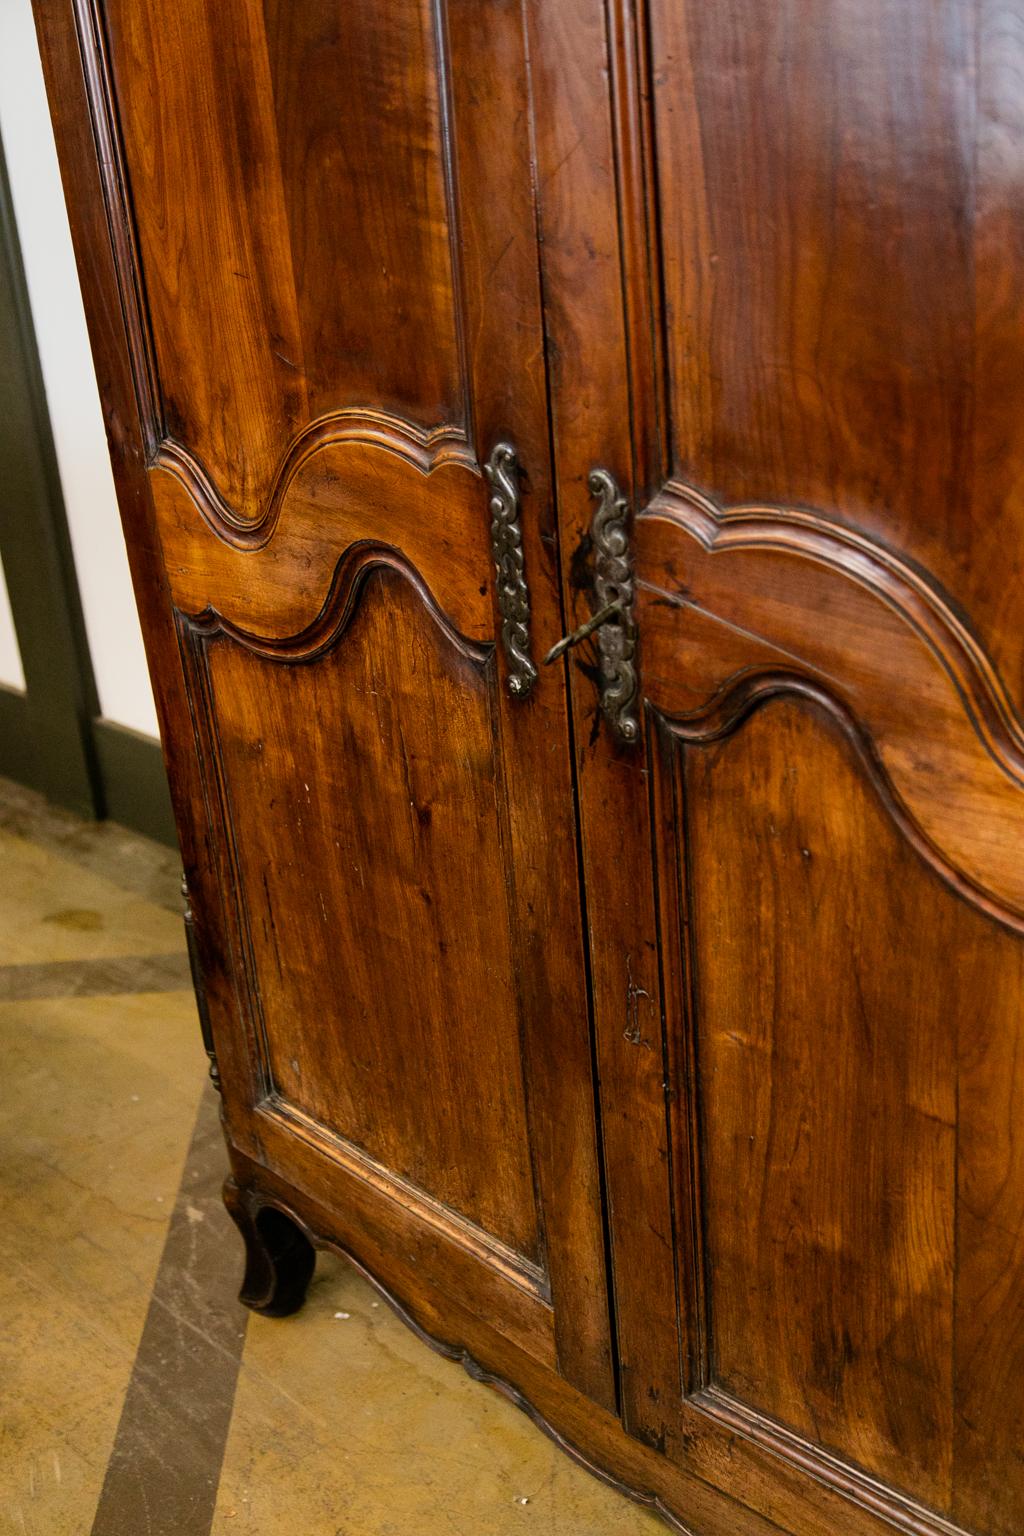 French cherry armoire has the original steel hardware and working lock and key. The front and cornice are made of cherry. The front has a recessed paneled frieze and a removable cherry cornice. The doors are on removable hinges and have shaped